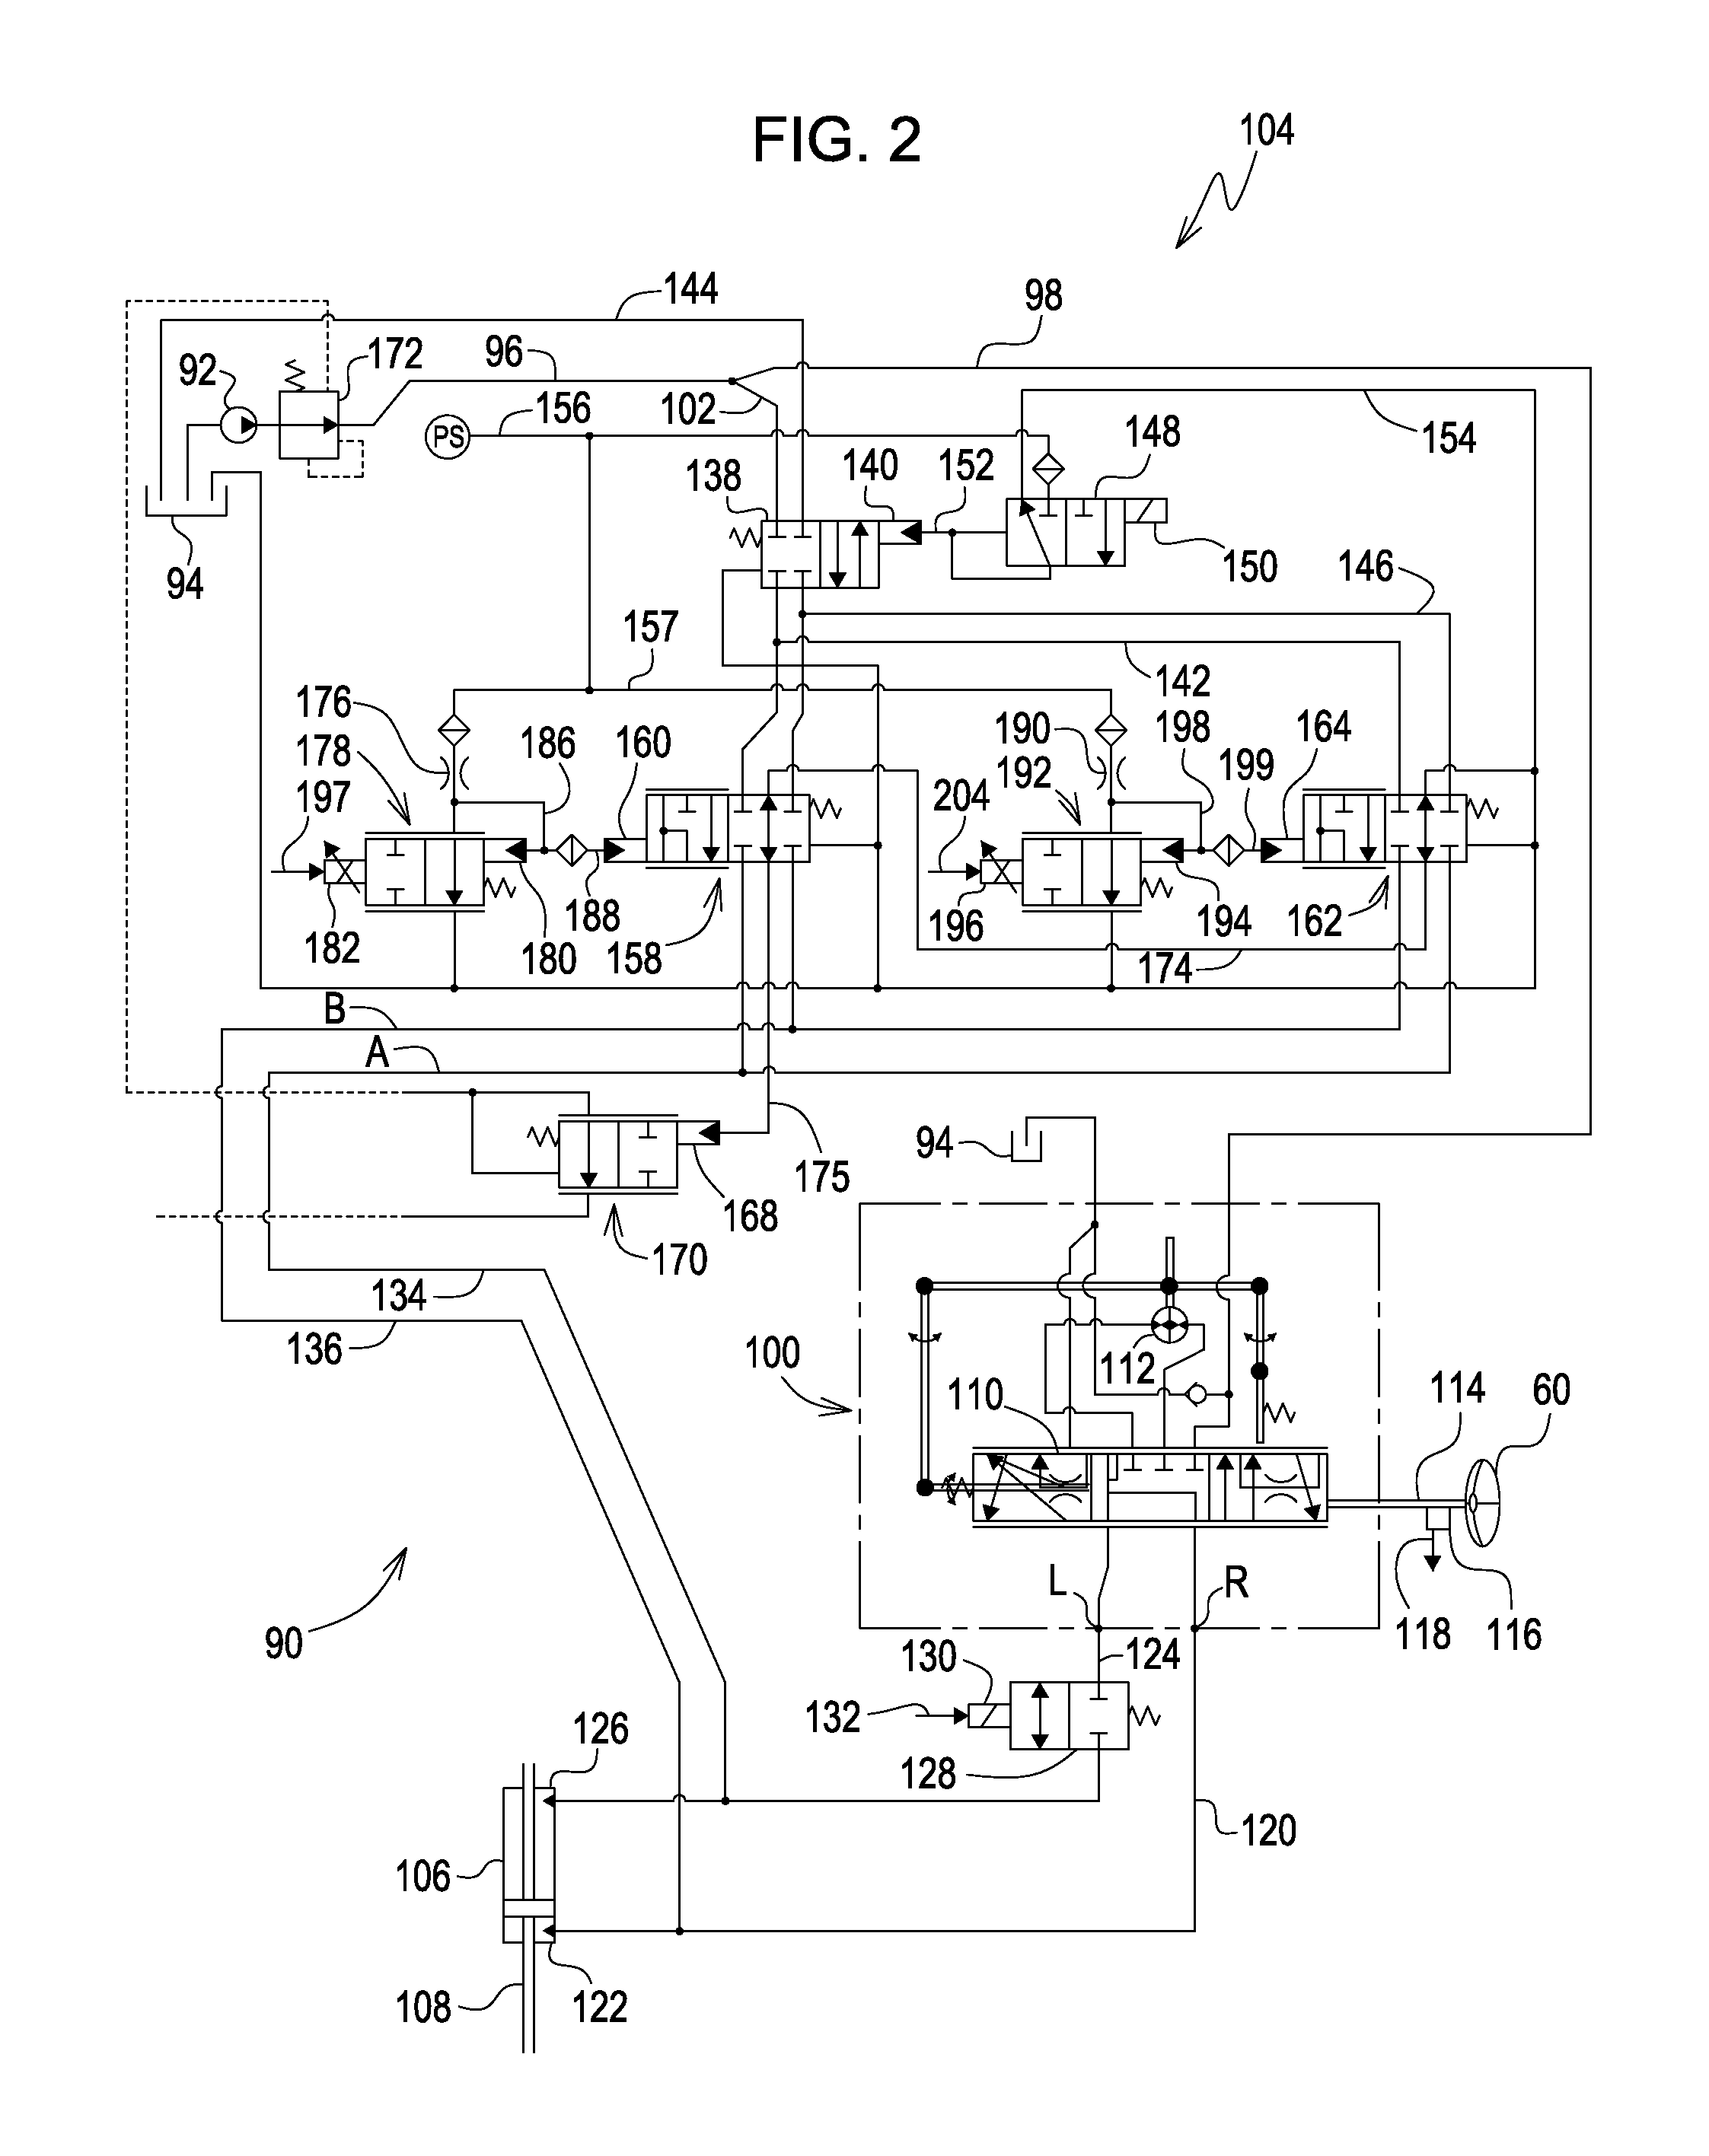 Steering control system for hydrostatically driven front vehicle ground wheels and steerable rear caster wheels